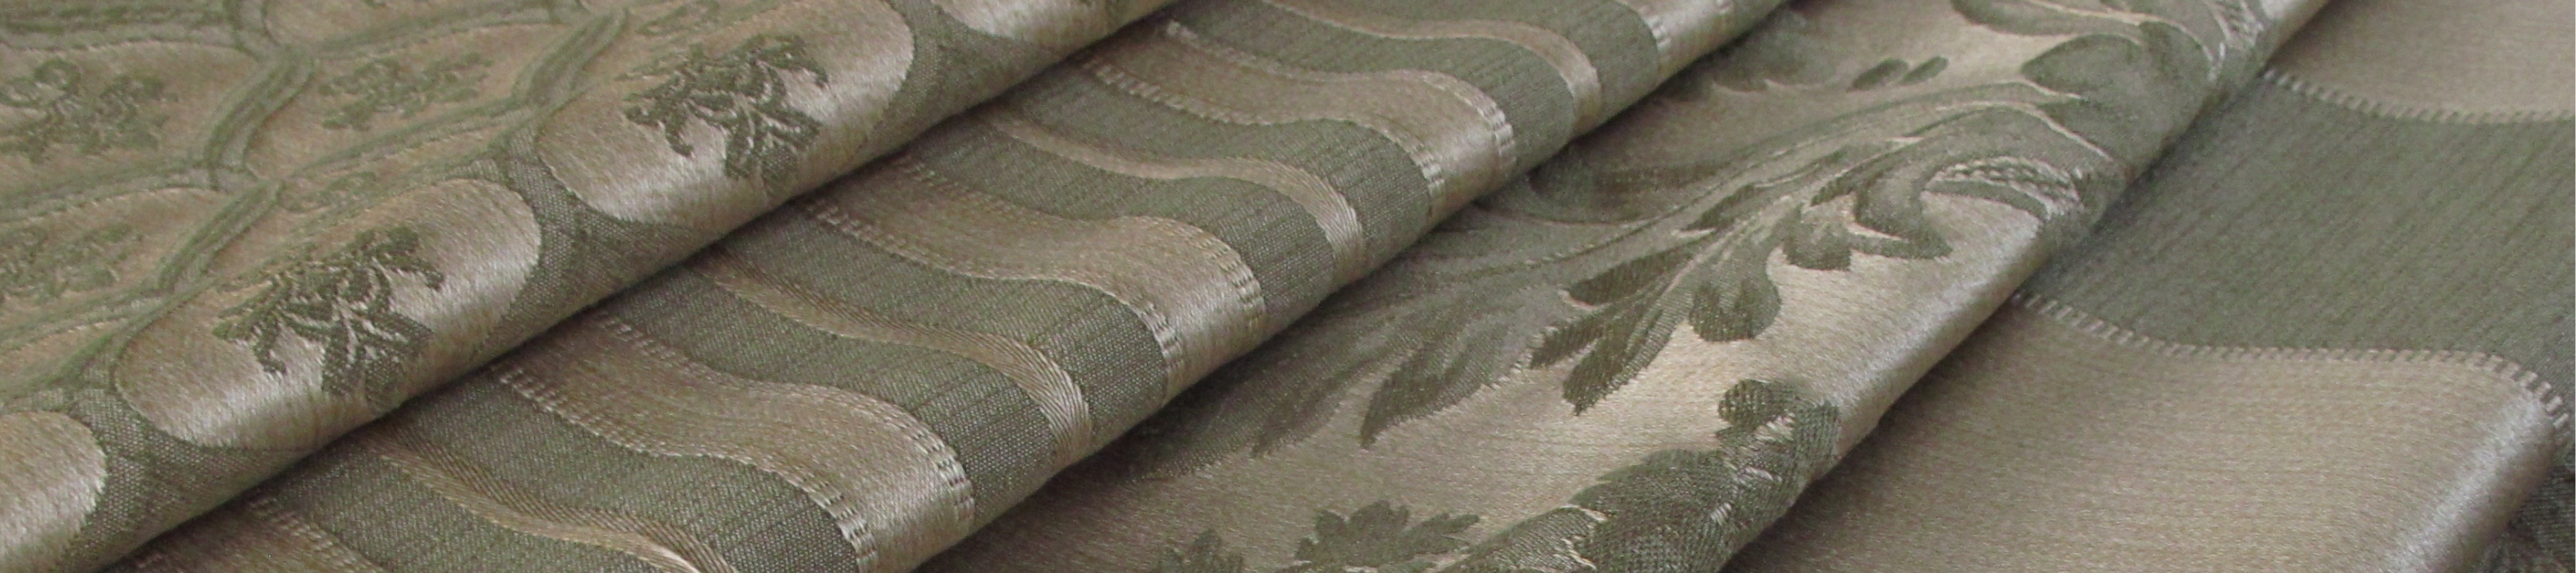 upholstery fabric Manchester, curtain fabric Manchester